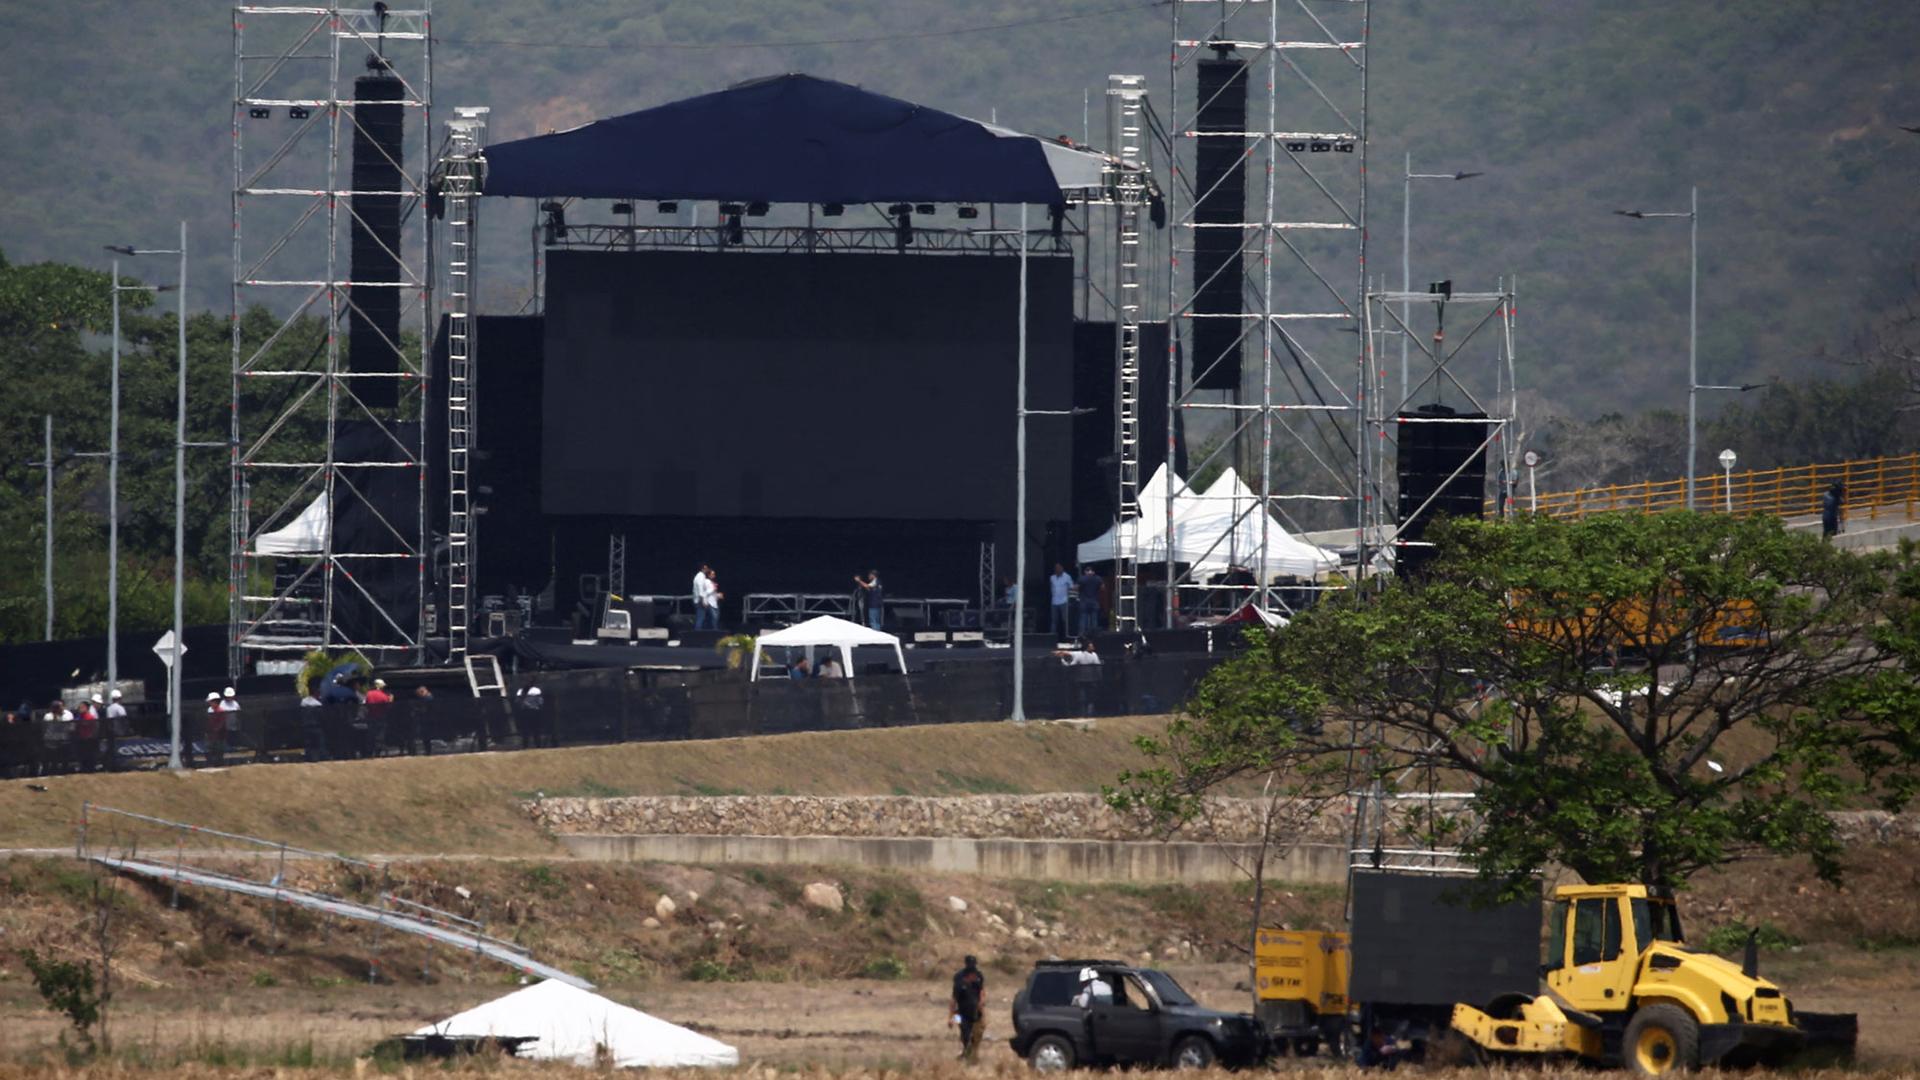 A large outdoor stage is shown being constructed in Cucuta, Colombia.